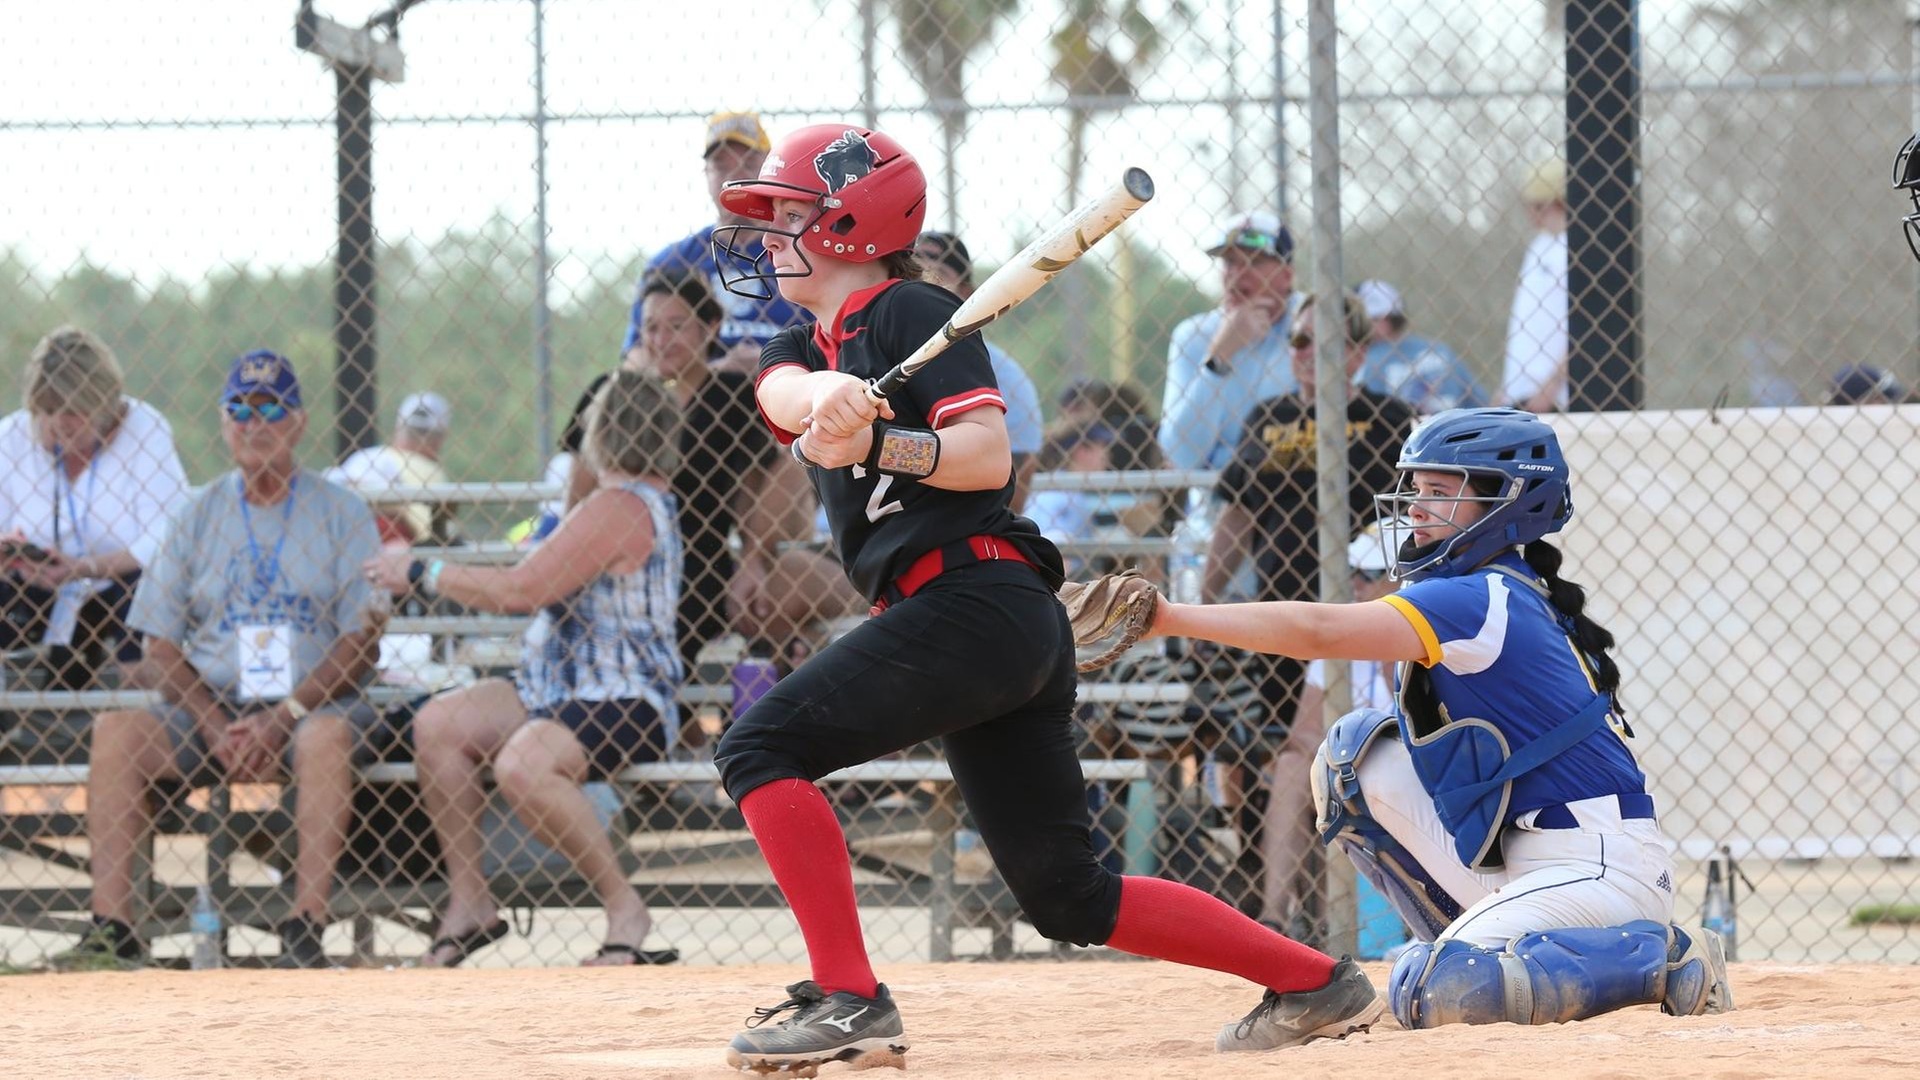 women's softball player wearing a black uniform with a red helmet swings through a pitch